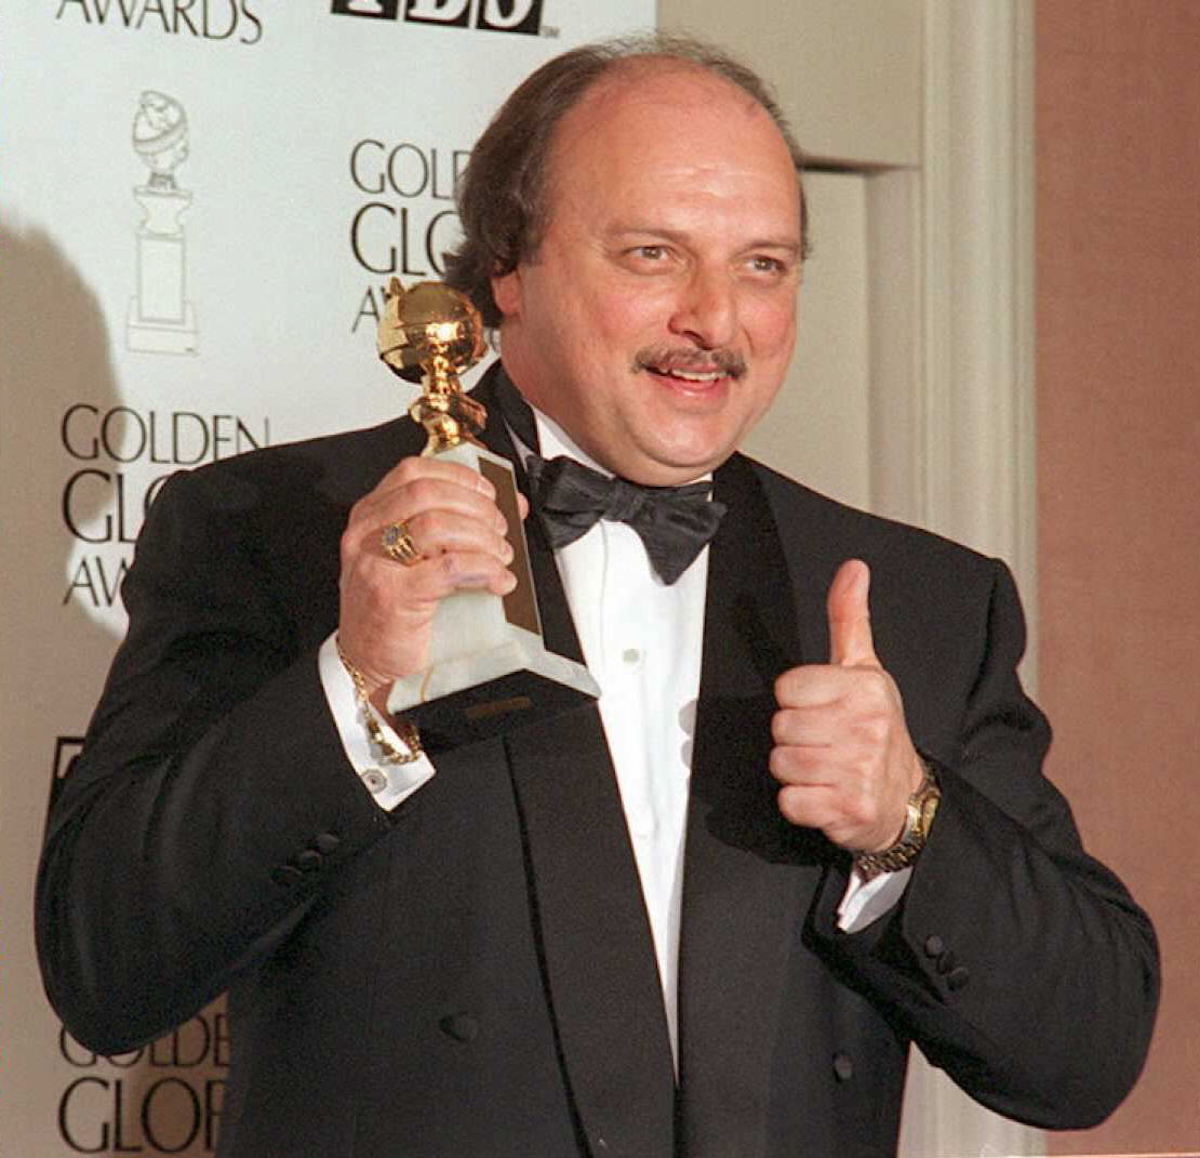 Actor Dennis Franz poses 21 January with his Golden Globe award for Best Performance by an Actor in a Television Series-Drama category for his role in "NYPD Blues."